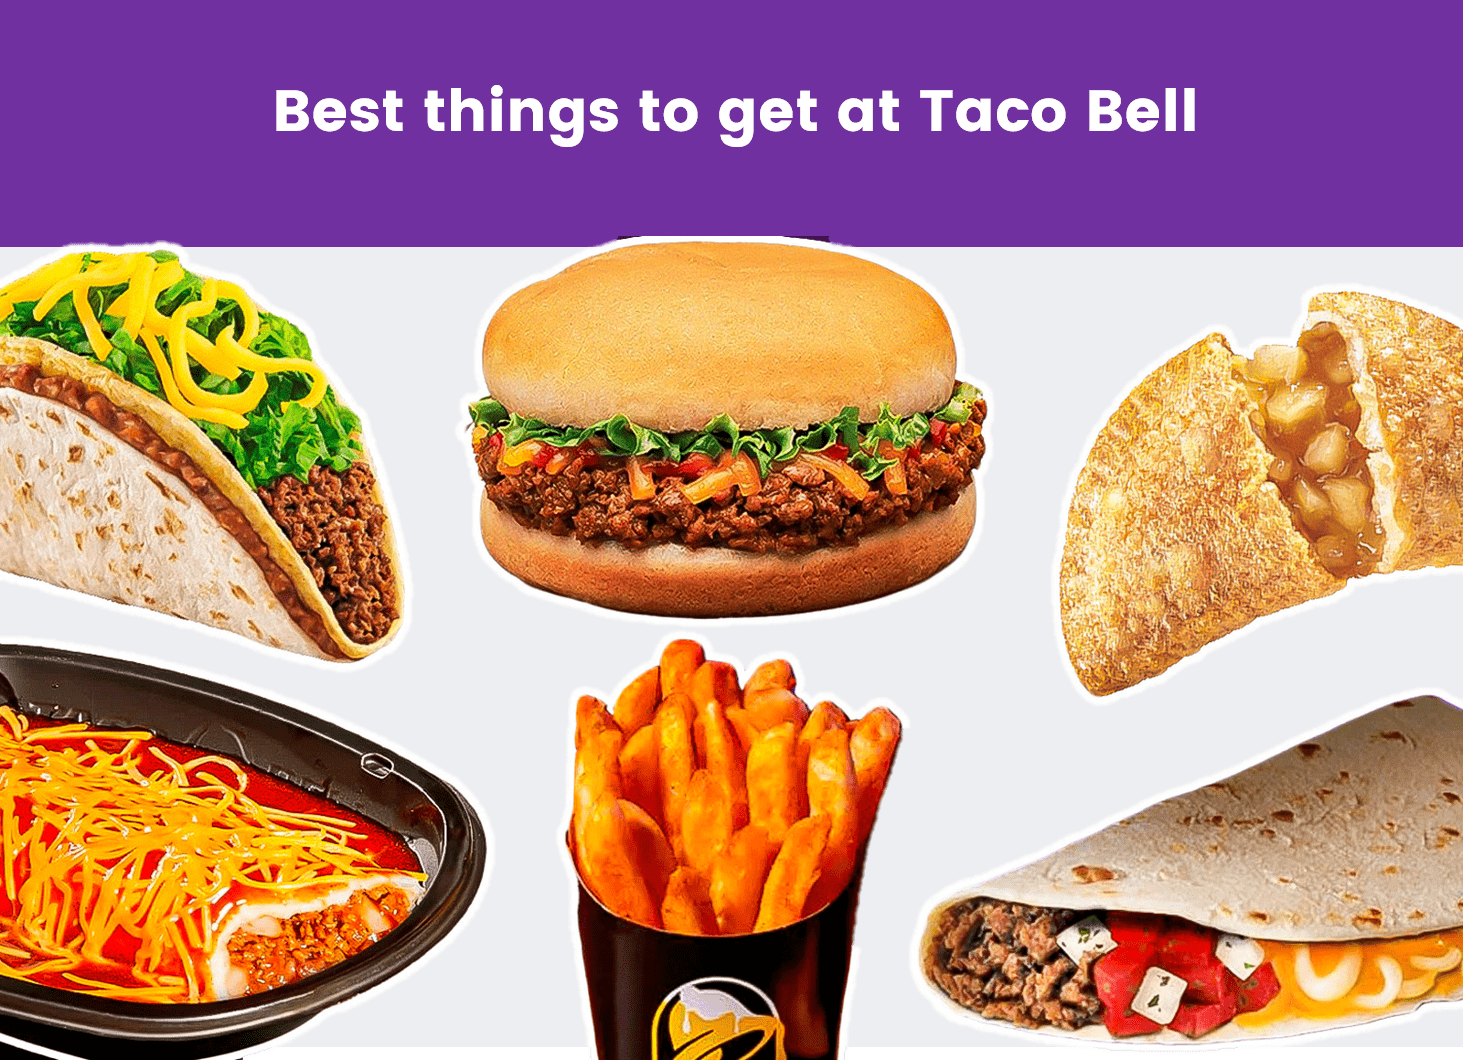 Best things to get at Taco Bell
